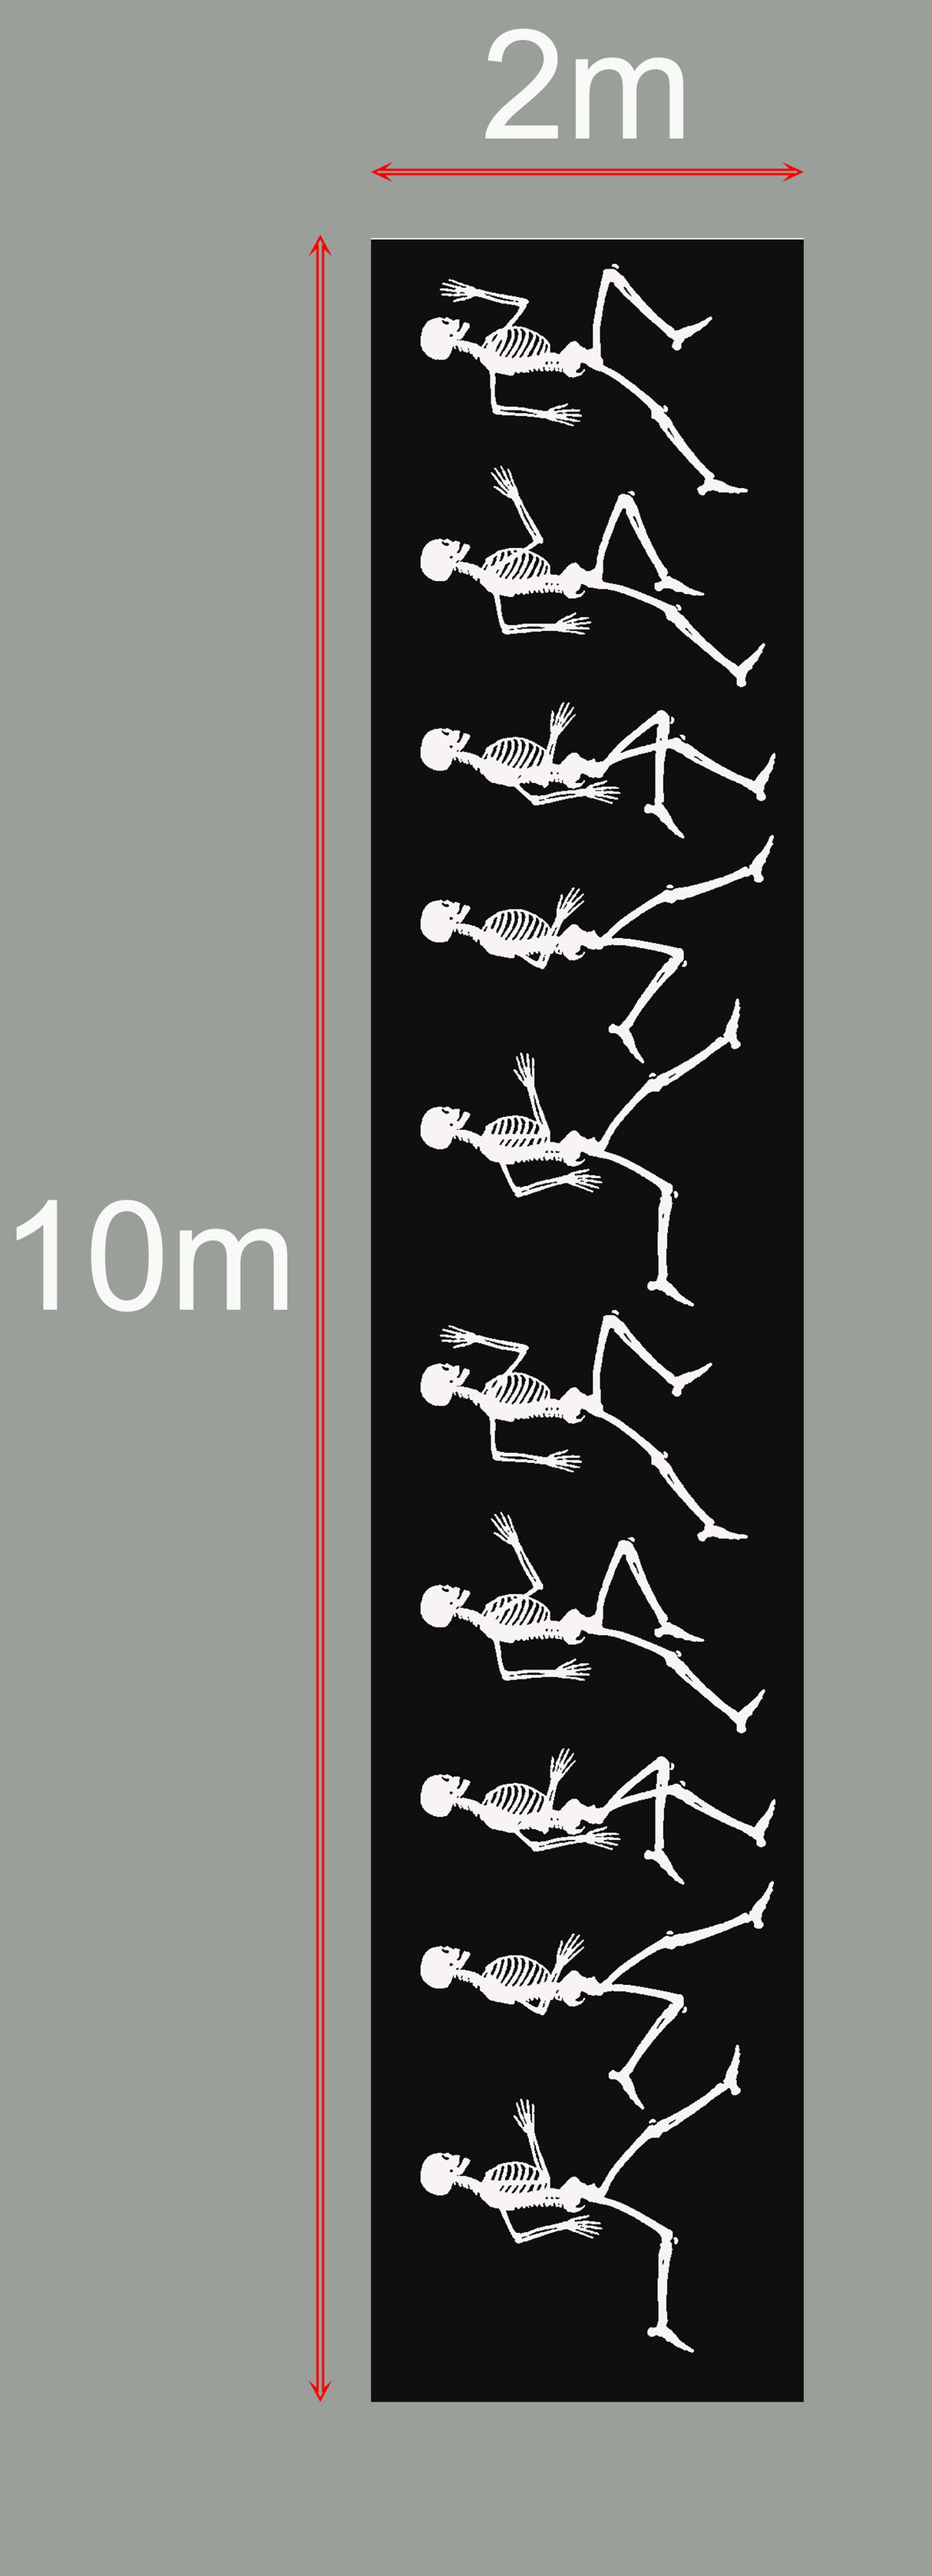 Grafika Sprint Tracks Collection 10m x 2m Wide (Price includes worldwide shipping)